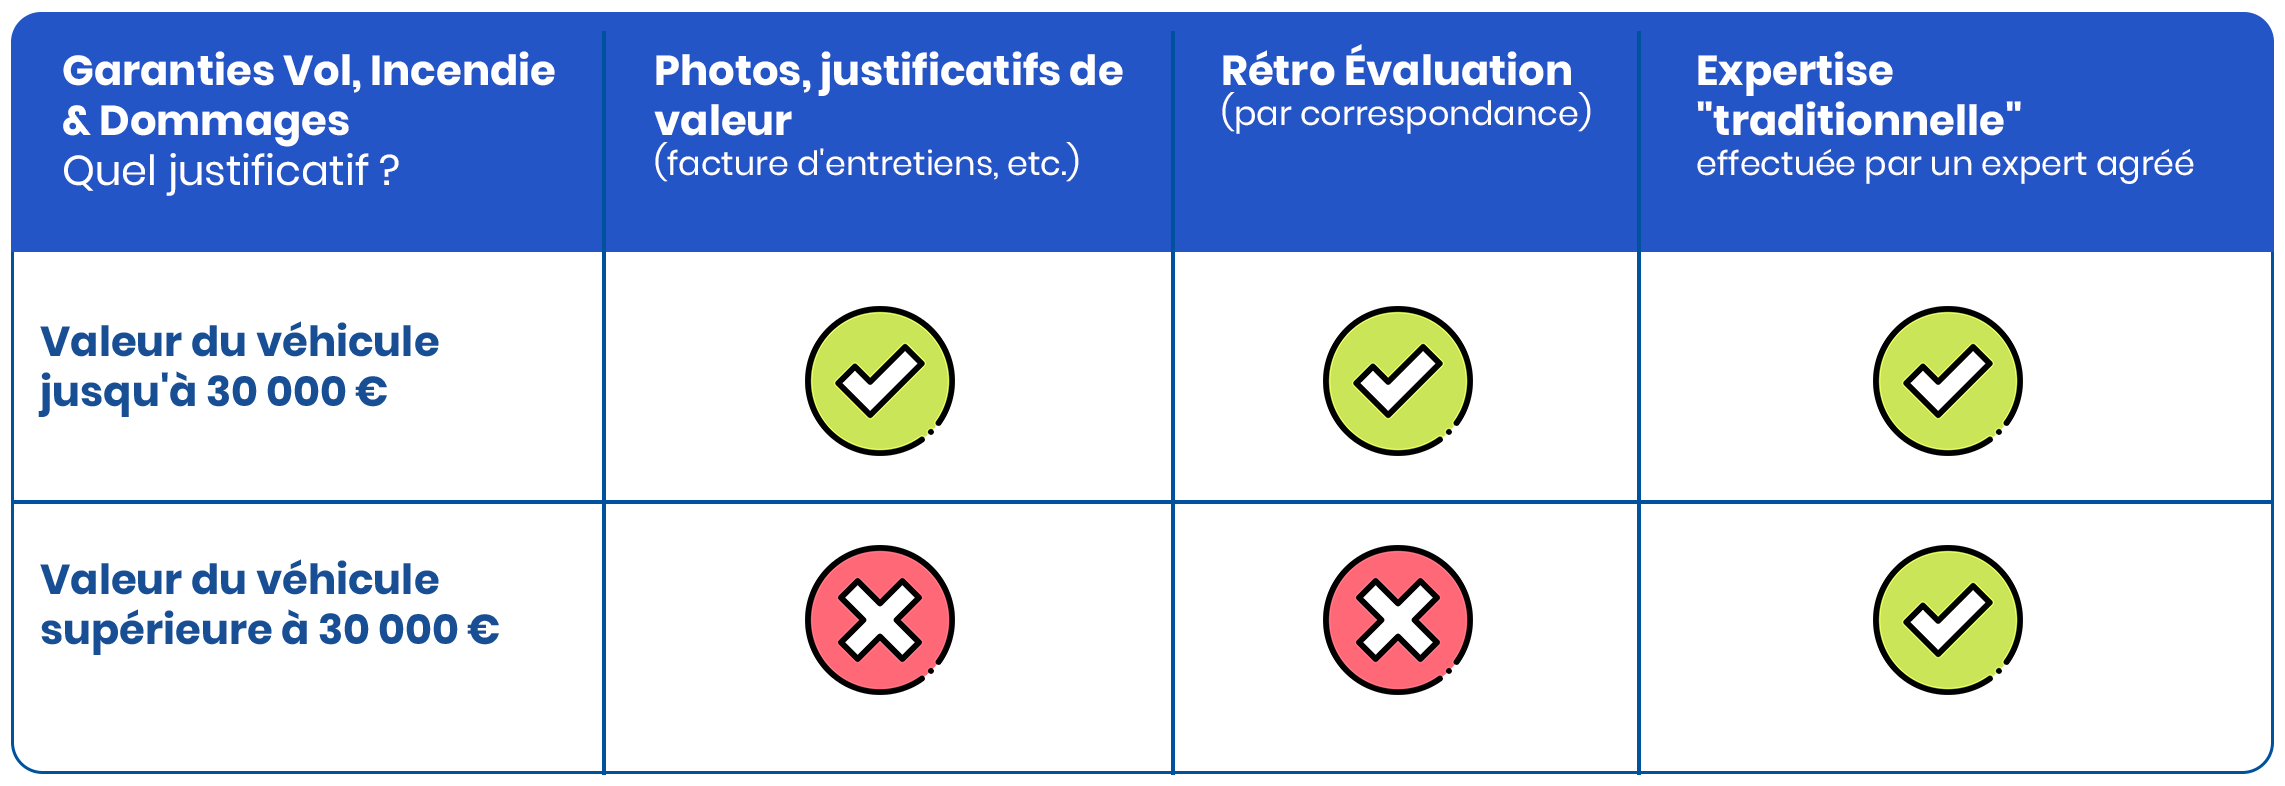 tableau justificatifs expertises collection